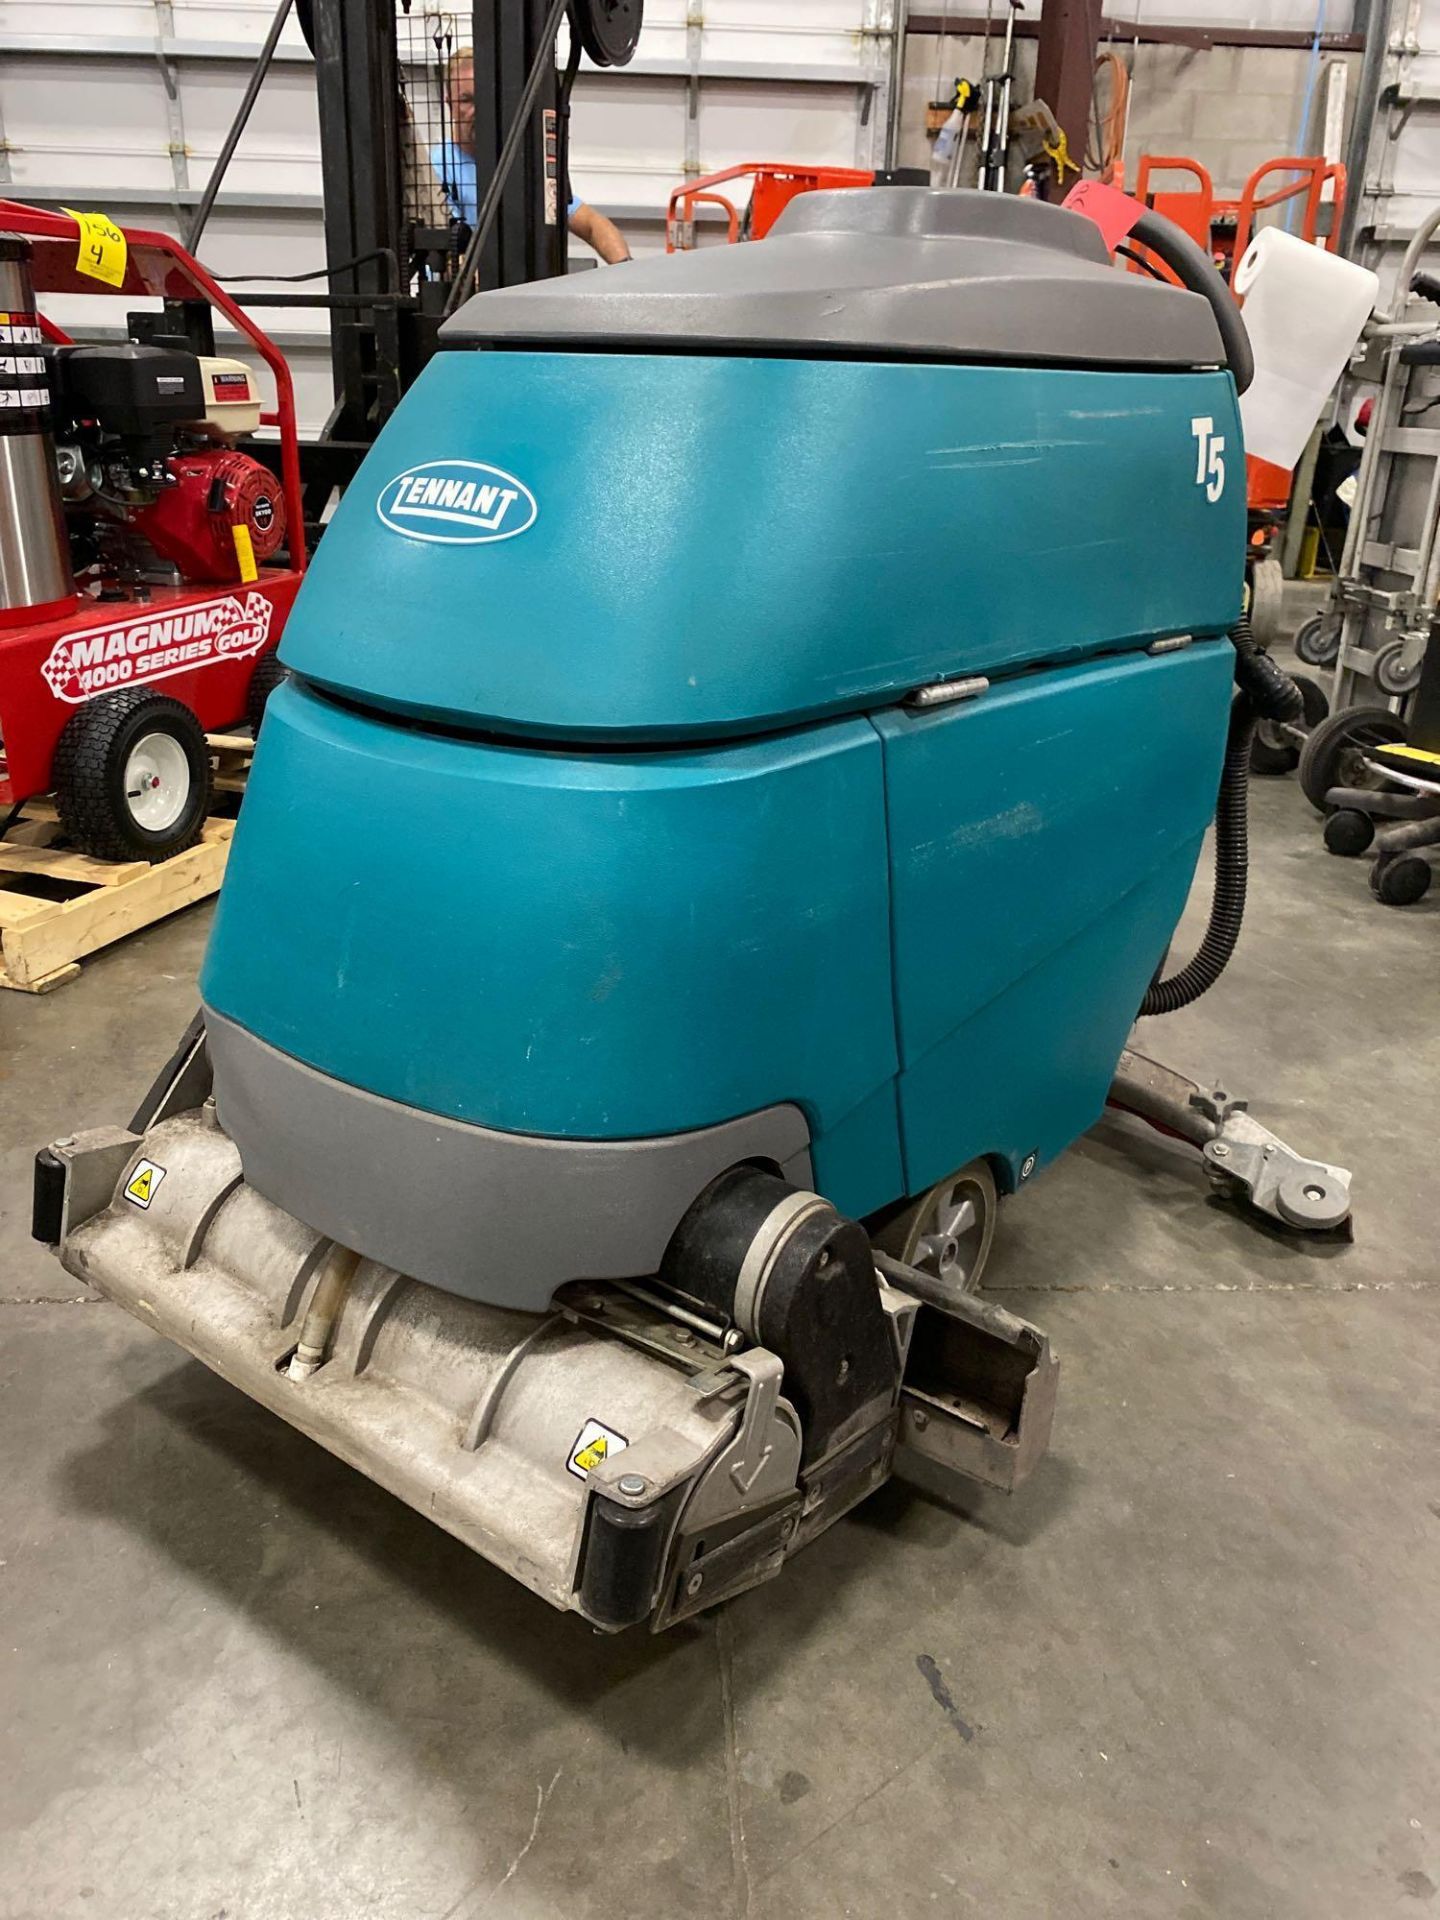 TENNANT T5 FLOOR SCRUBBER, BUILT IN BATTERY CHARGER, RUNS & OPERATES - Image 6 of 22